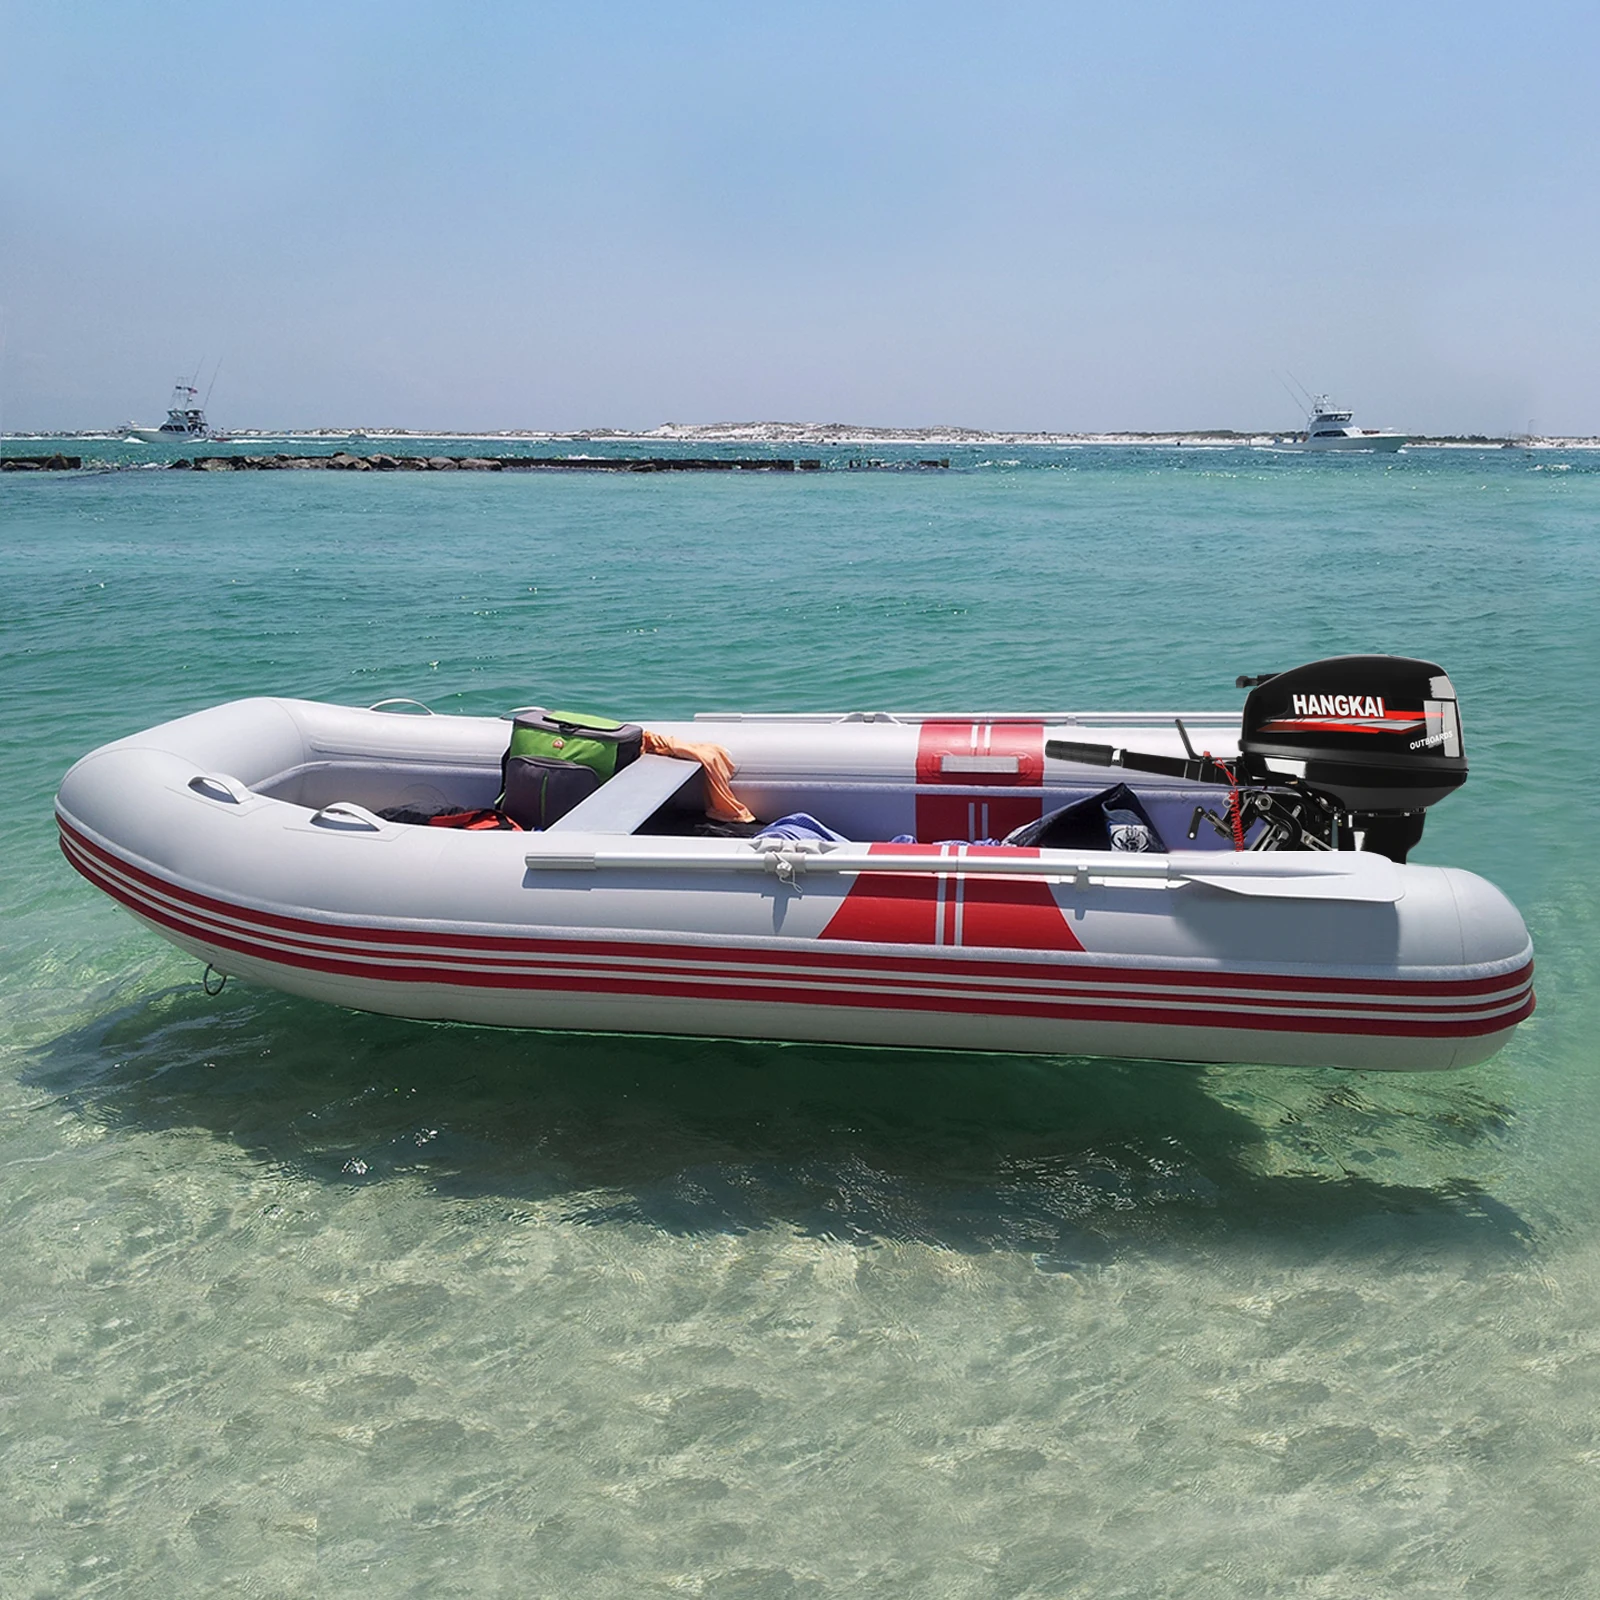 Hangkai 18 HP Boat Outboard Motor Long Shaft, 2 Strokes Inflatable Gasolina Boat Outboard Engine,Water Cooling System